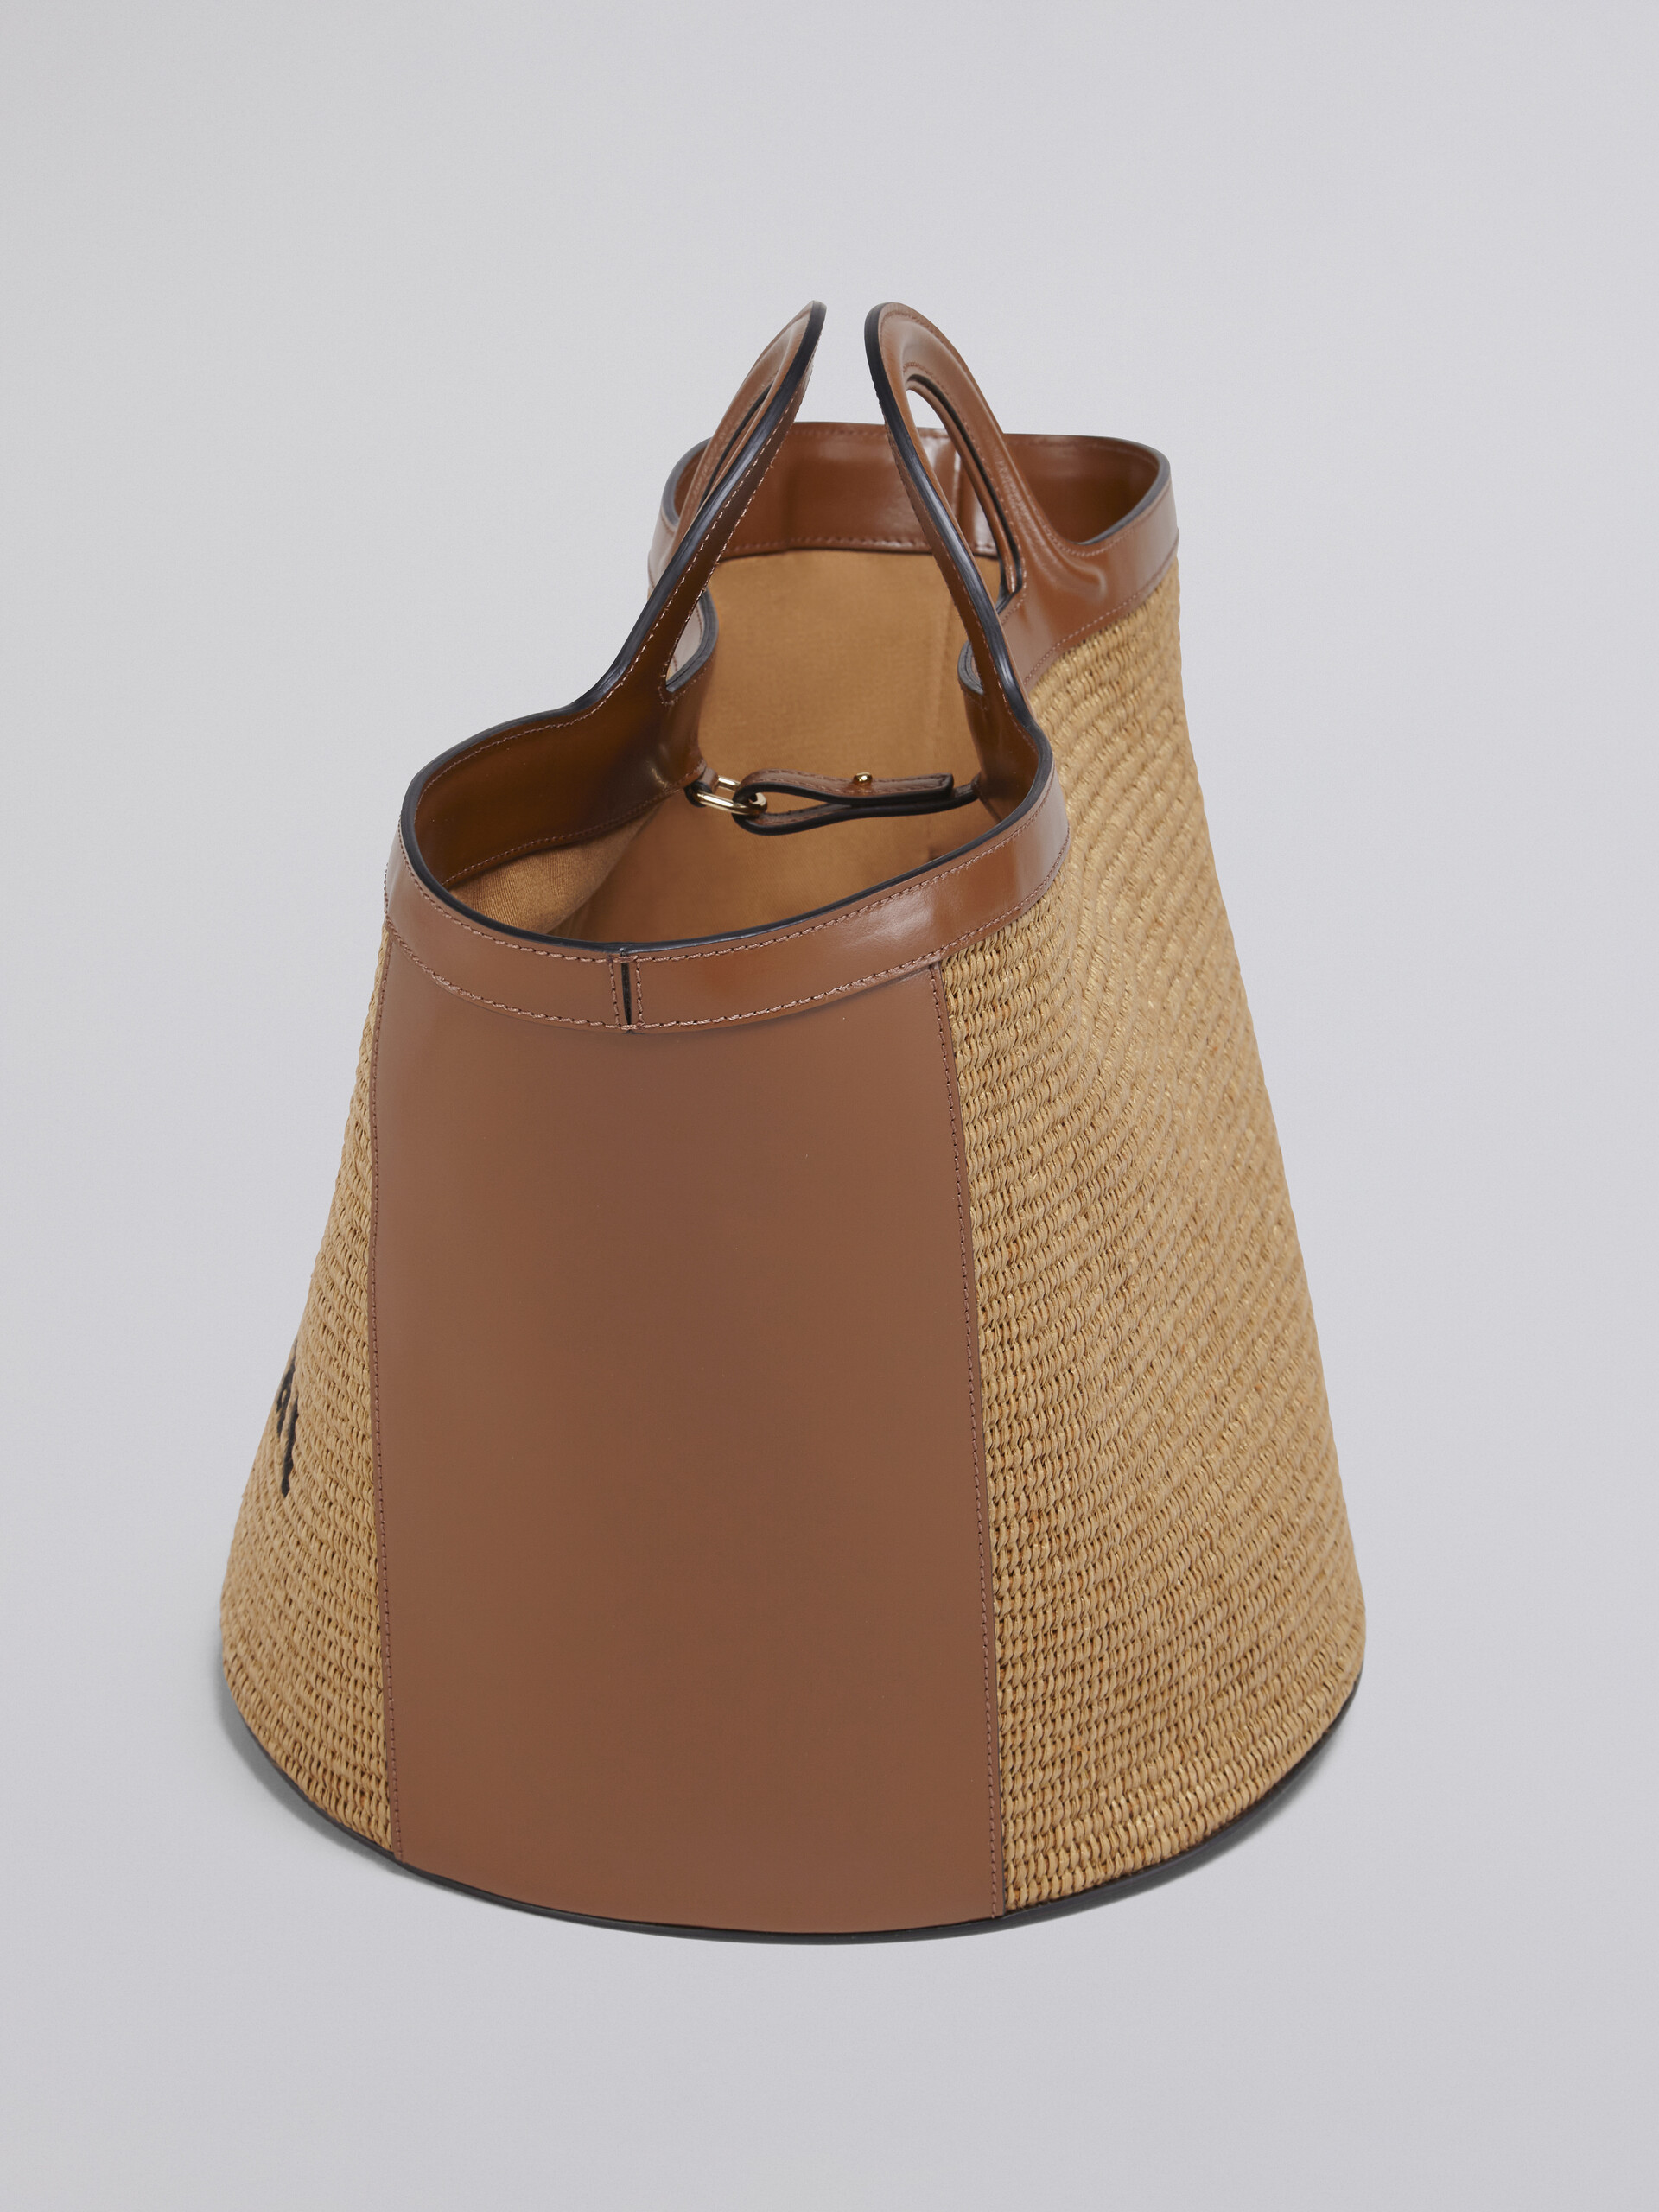 Tropicalia Large Bag in brown raffia-effect fabric and leather - Handbags - Image 5